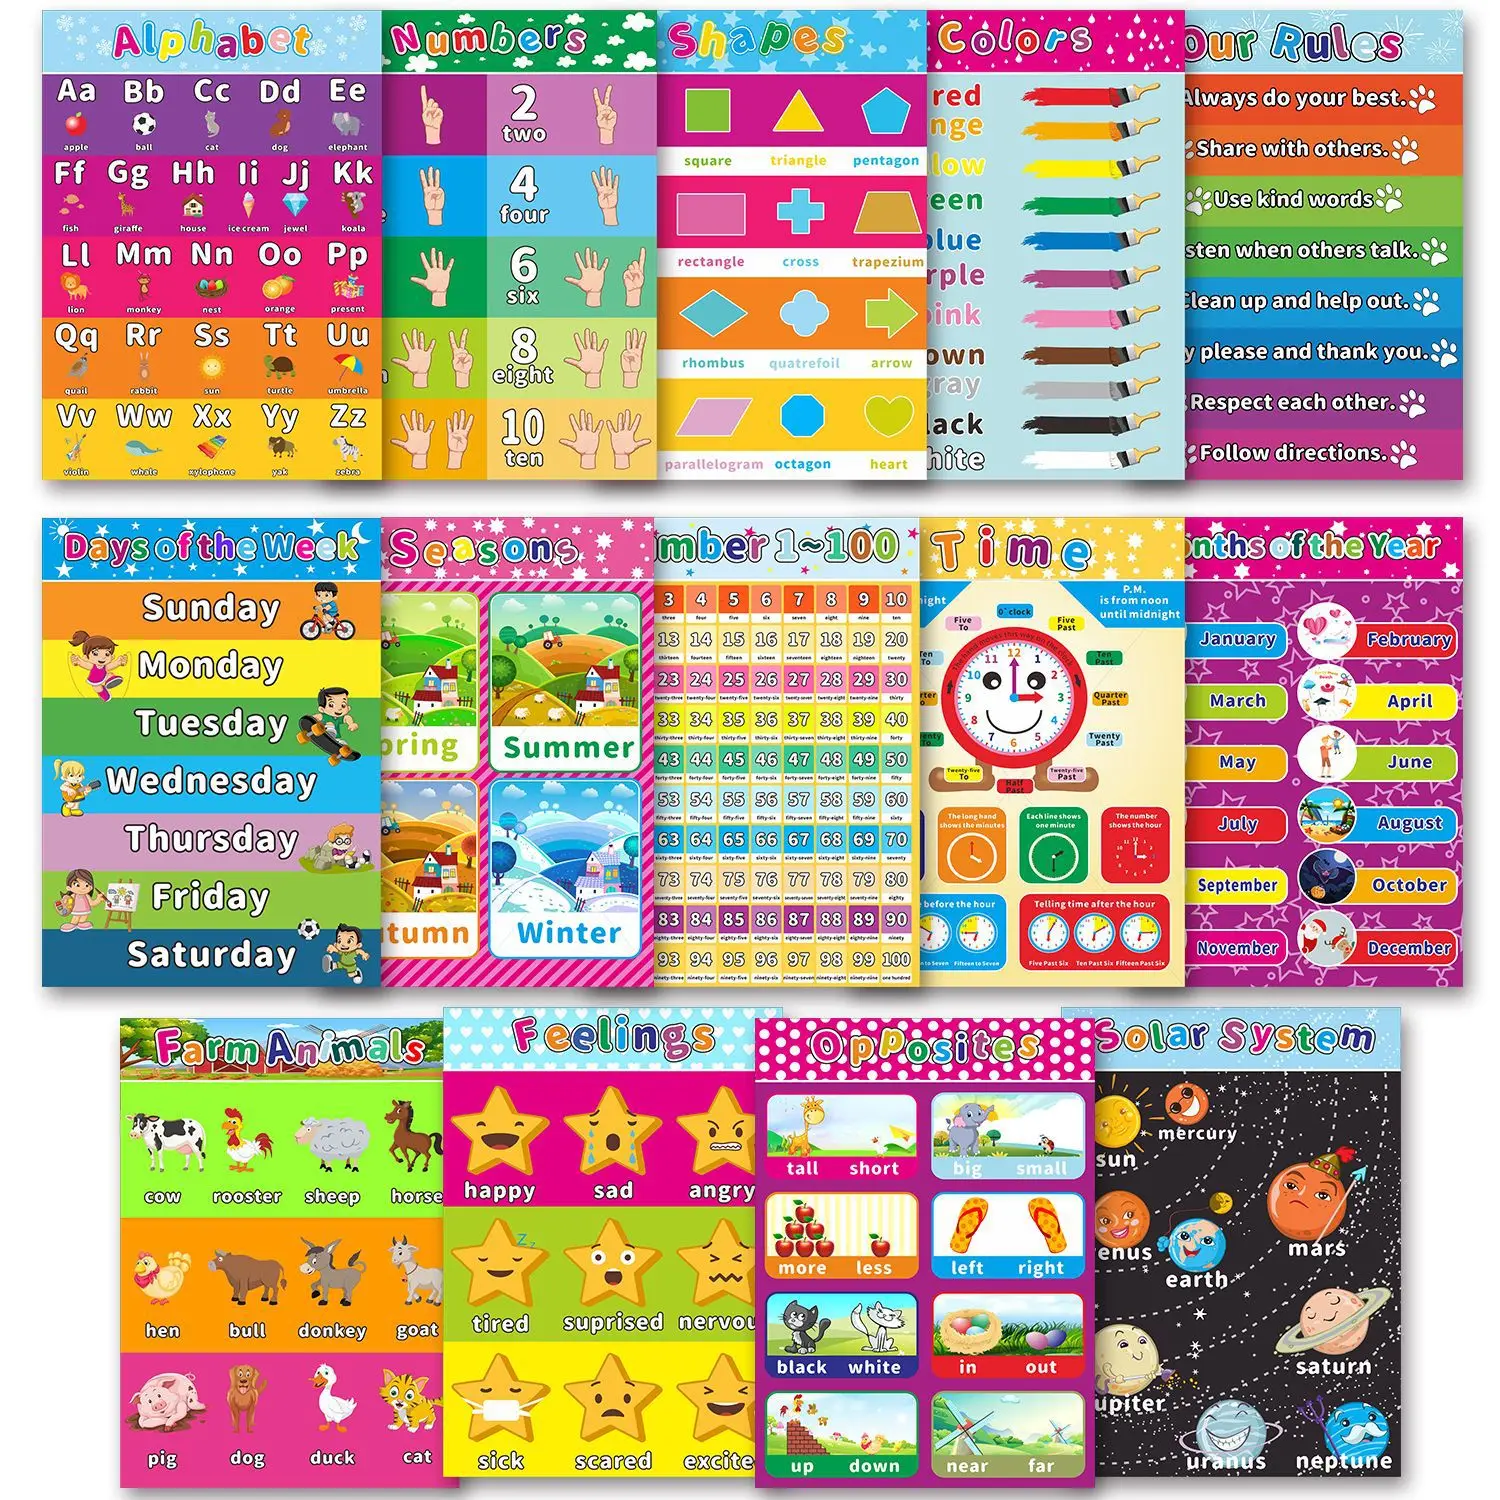 Details about   Educational Poster Laminated Wall Chart for Children Kids Learning Preschool 